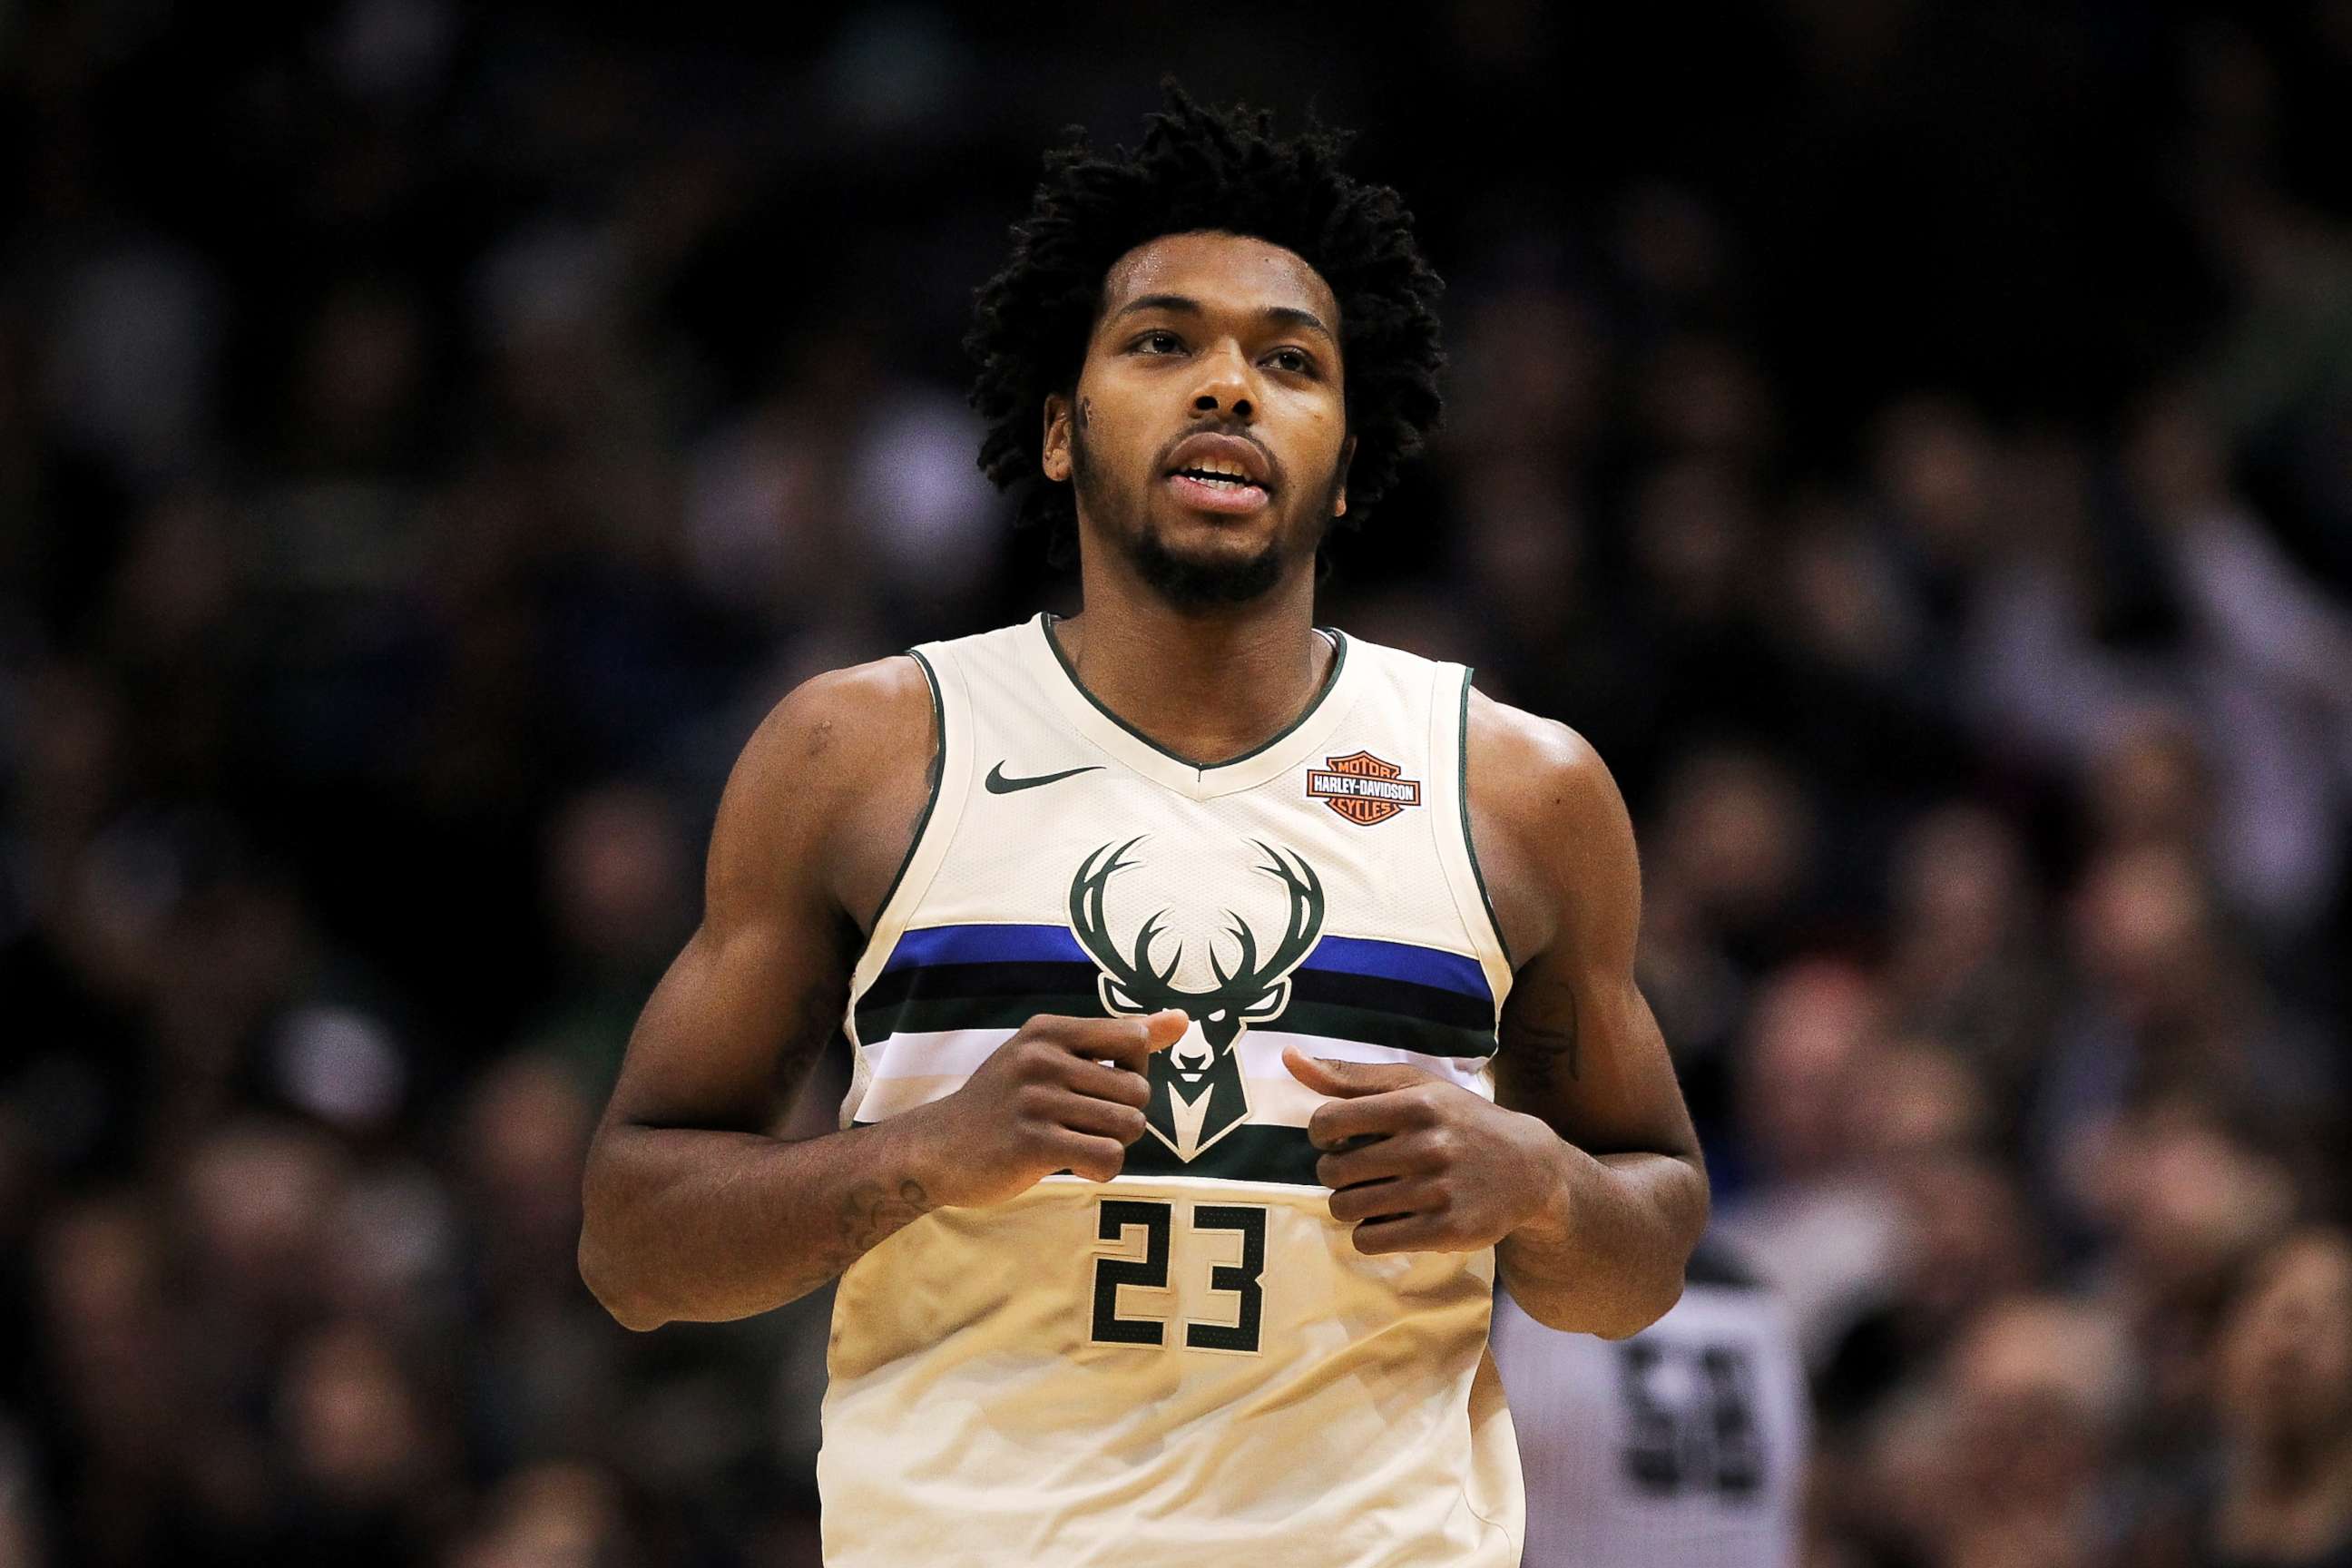 PHOTO: Sterling Brown #23 of the Milwaukee Bucks jogs across the court in the fourth quarter against the Philadelphia 76ers at the Bradley Center on Jan. 29, 2018 in Milwaukee.